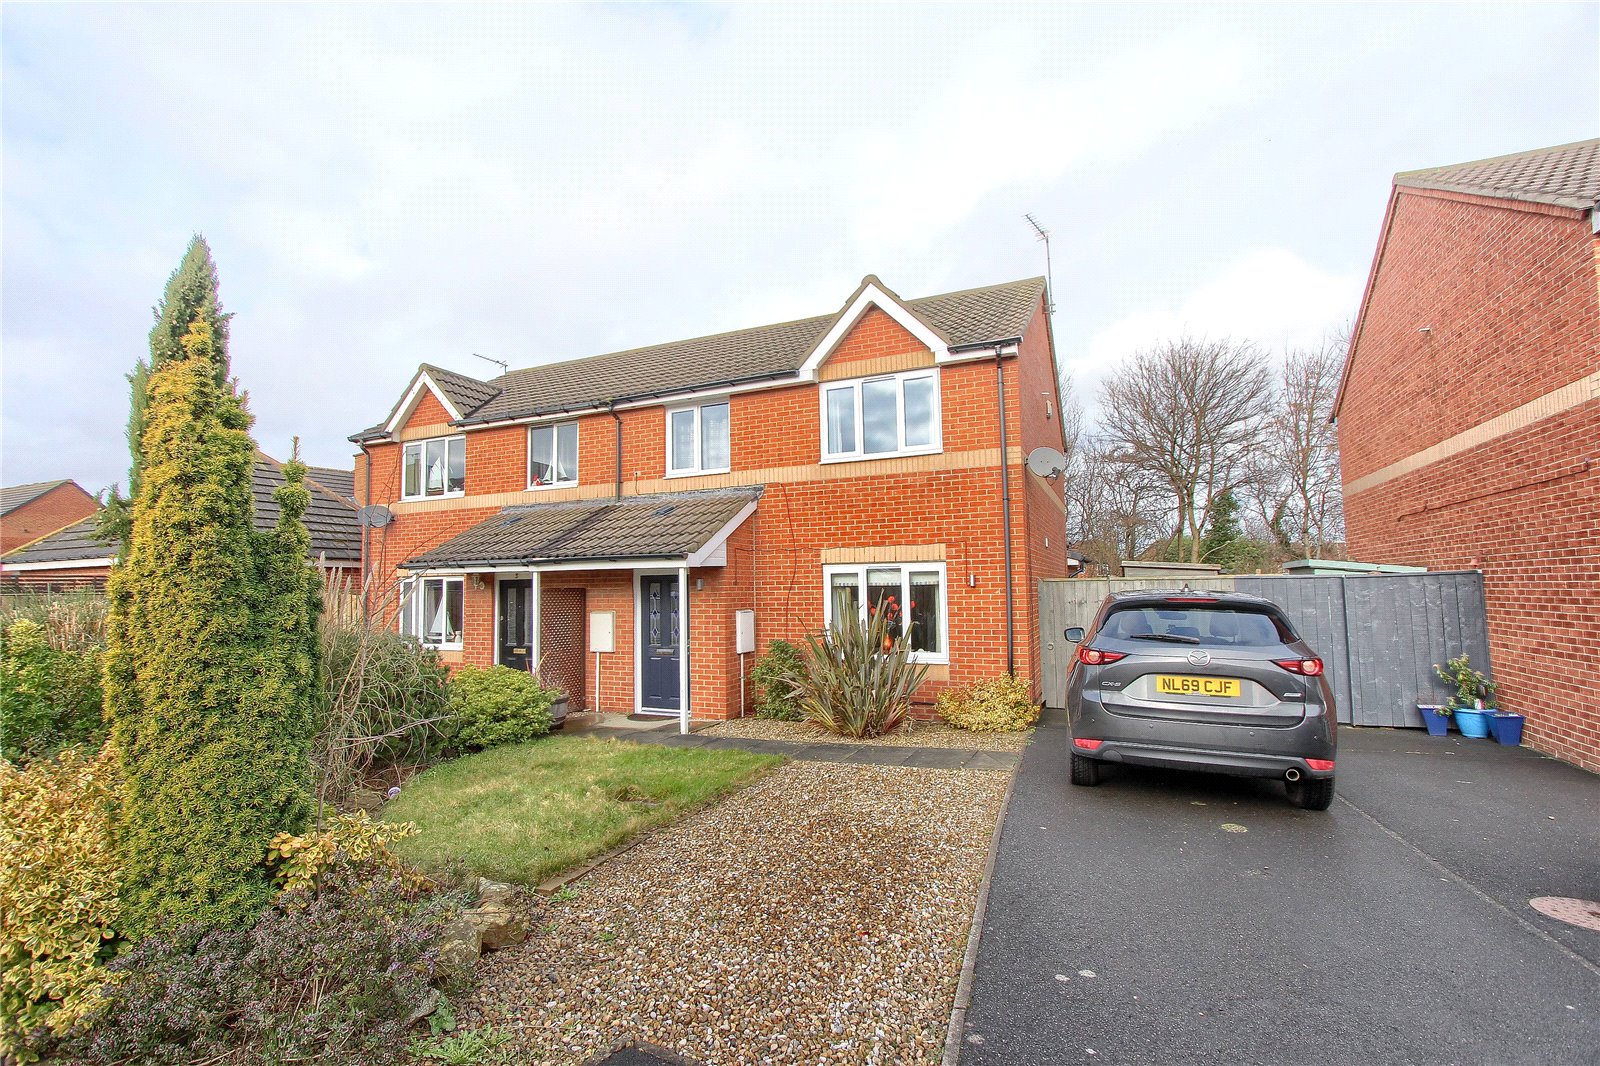 3 bed house for sale in Wembury Close, Redcar - Property Image 1